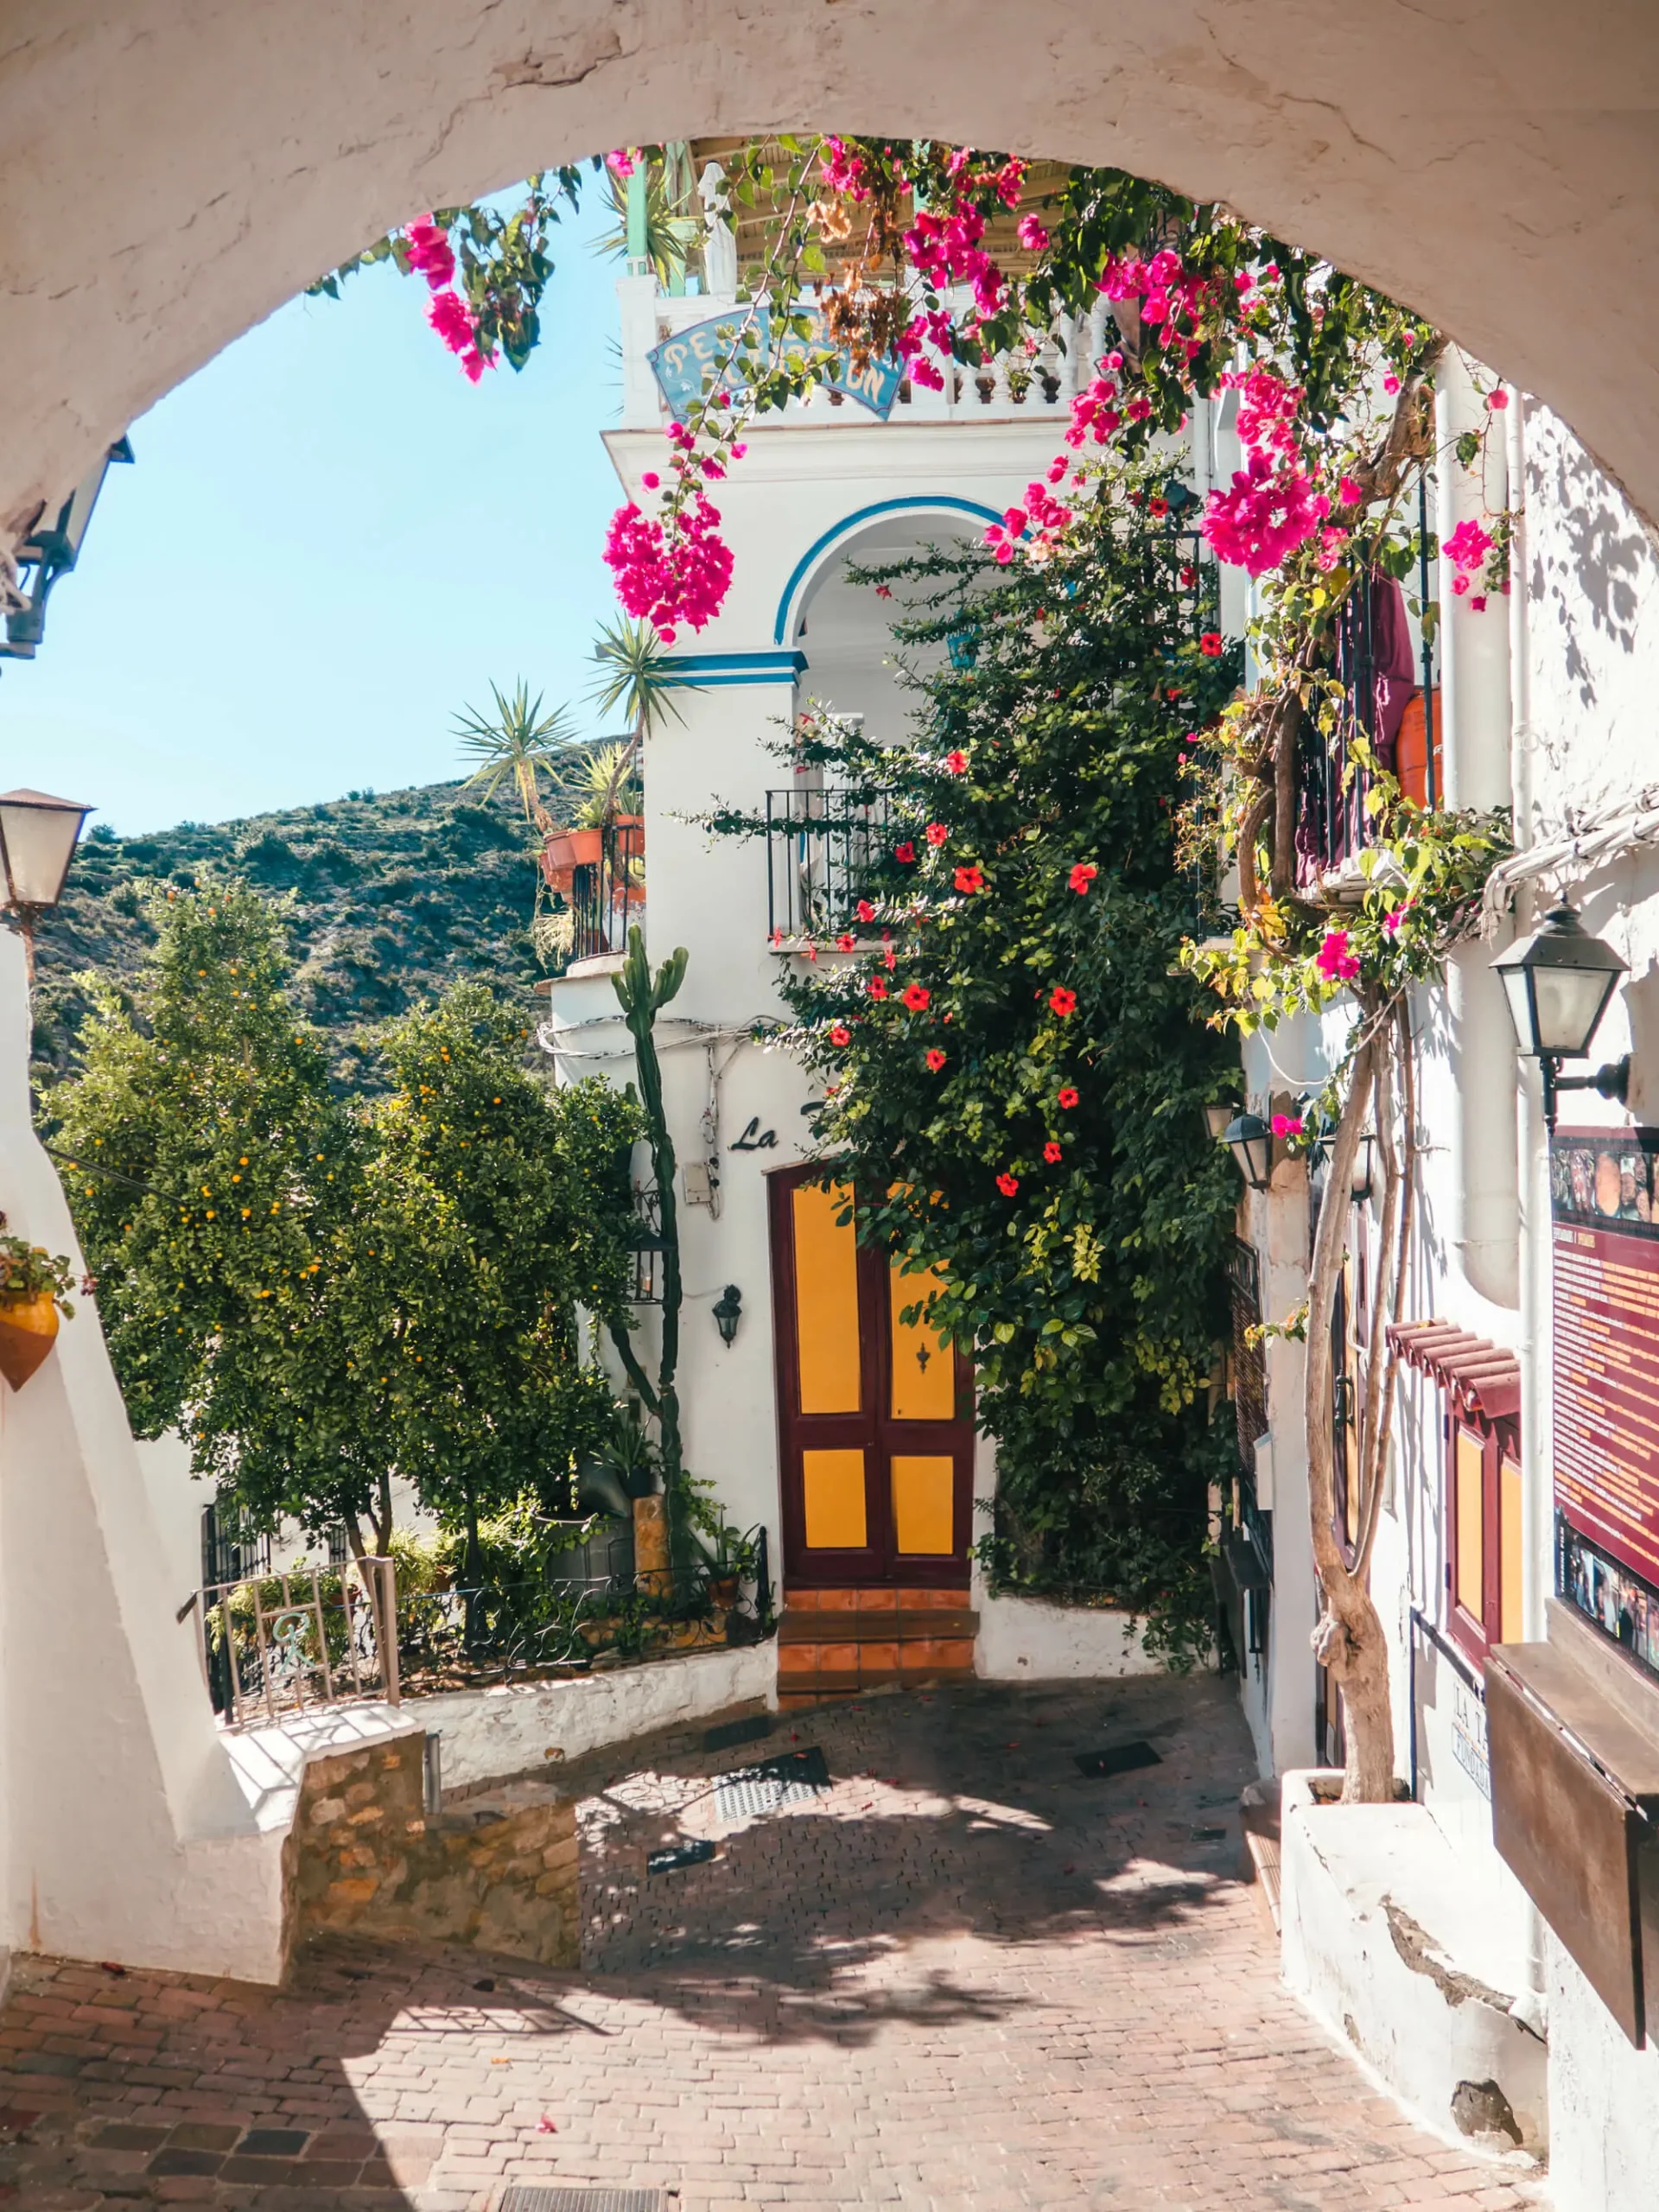 Looking at a red and yellow door on a white house covered in pink Bougainvillea through a white arch in Mojacar Pueblo, one of the most beautiful white villages in Spain.